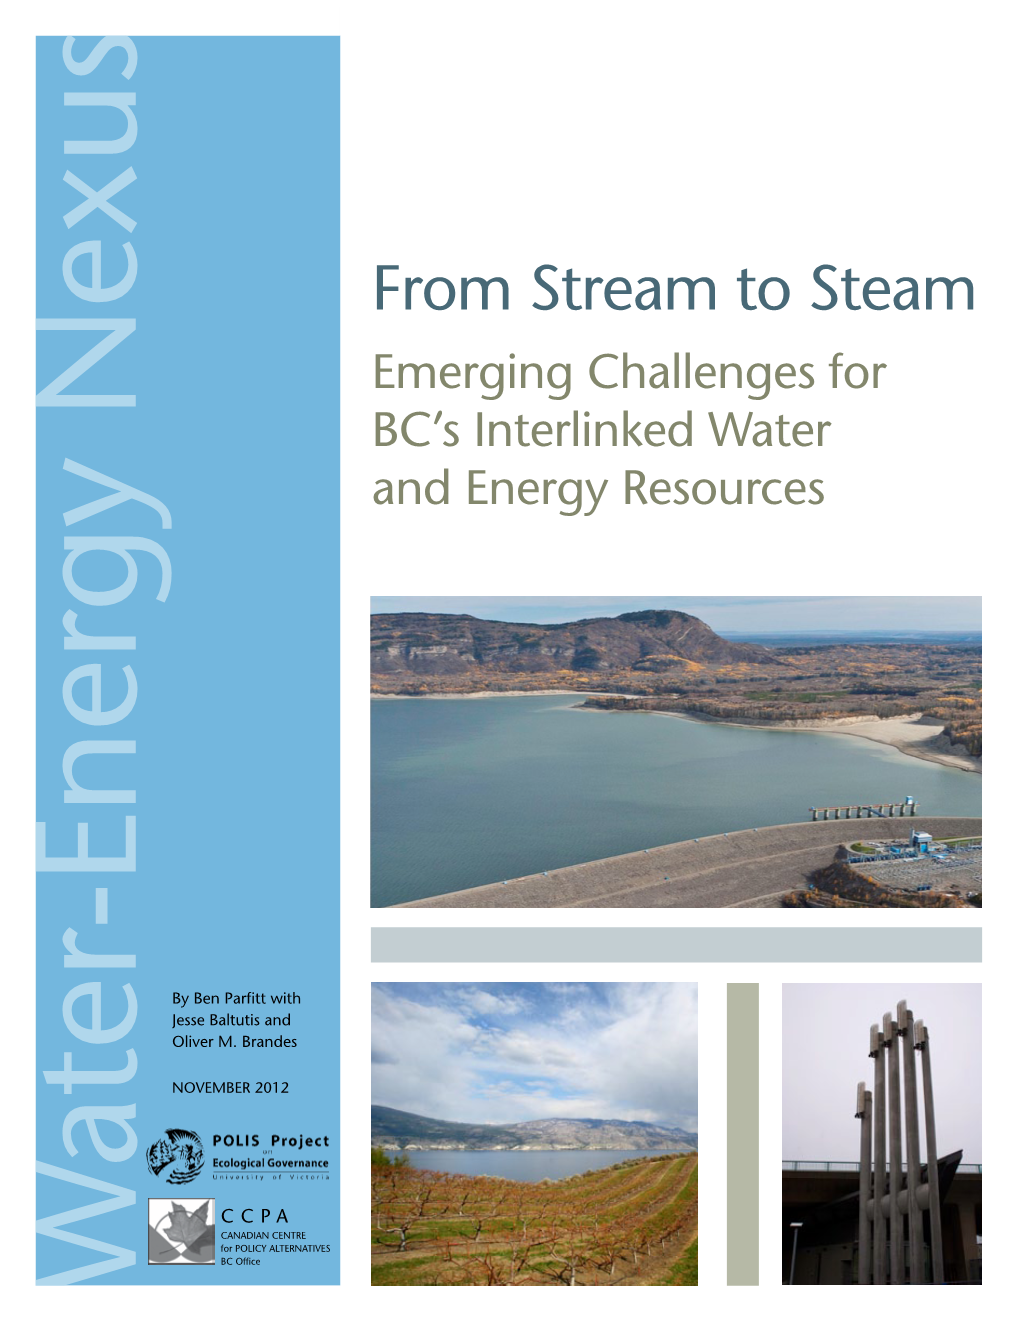 From Stream to Steam: Emerging Challenges for BC’S Interlinked Water and Energy Resources